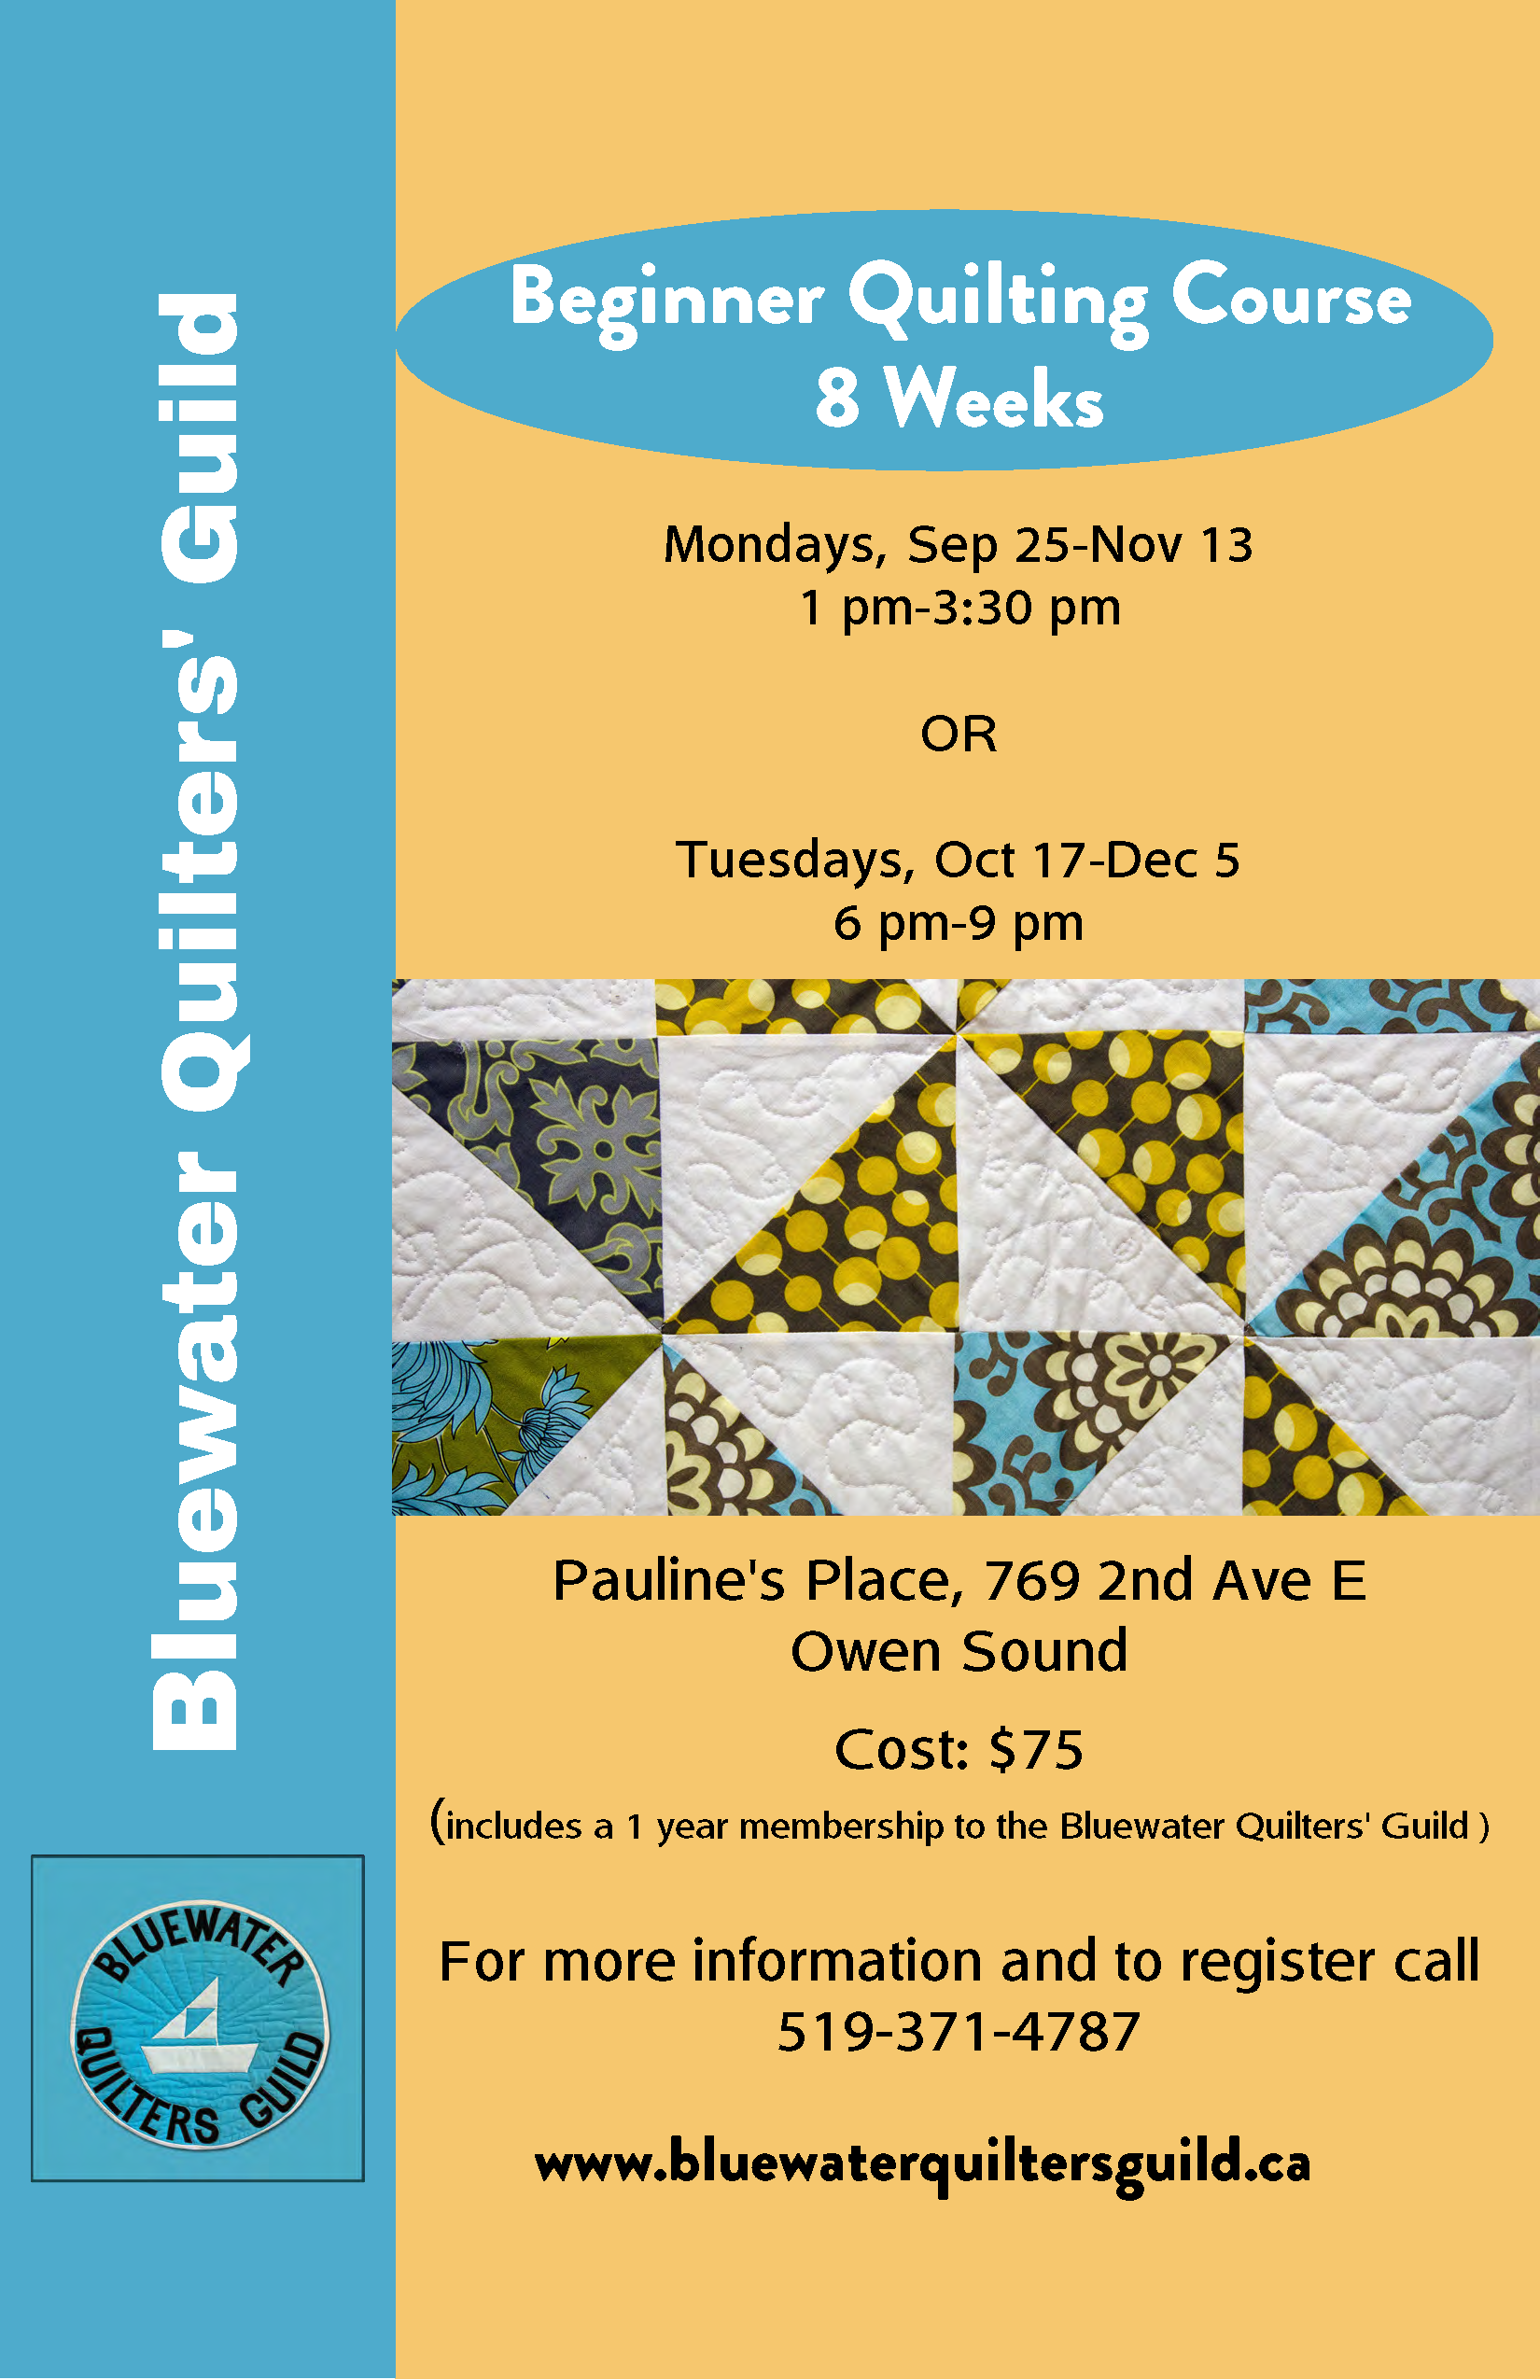 Event image Bluewater Quilters' Guild - Beginner Quilting Course